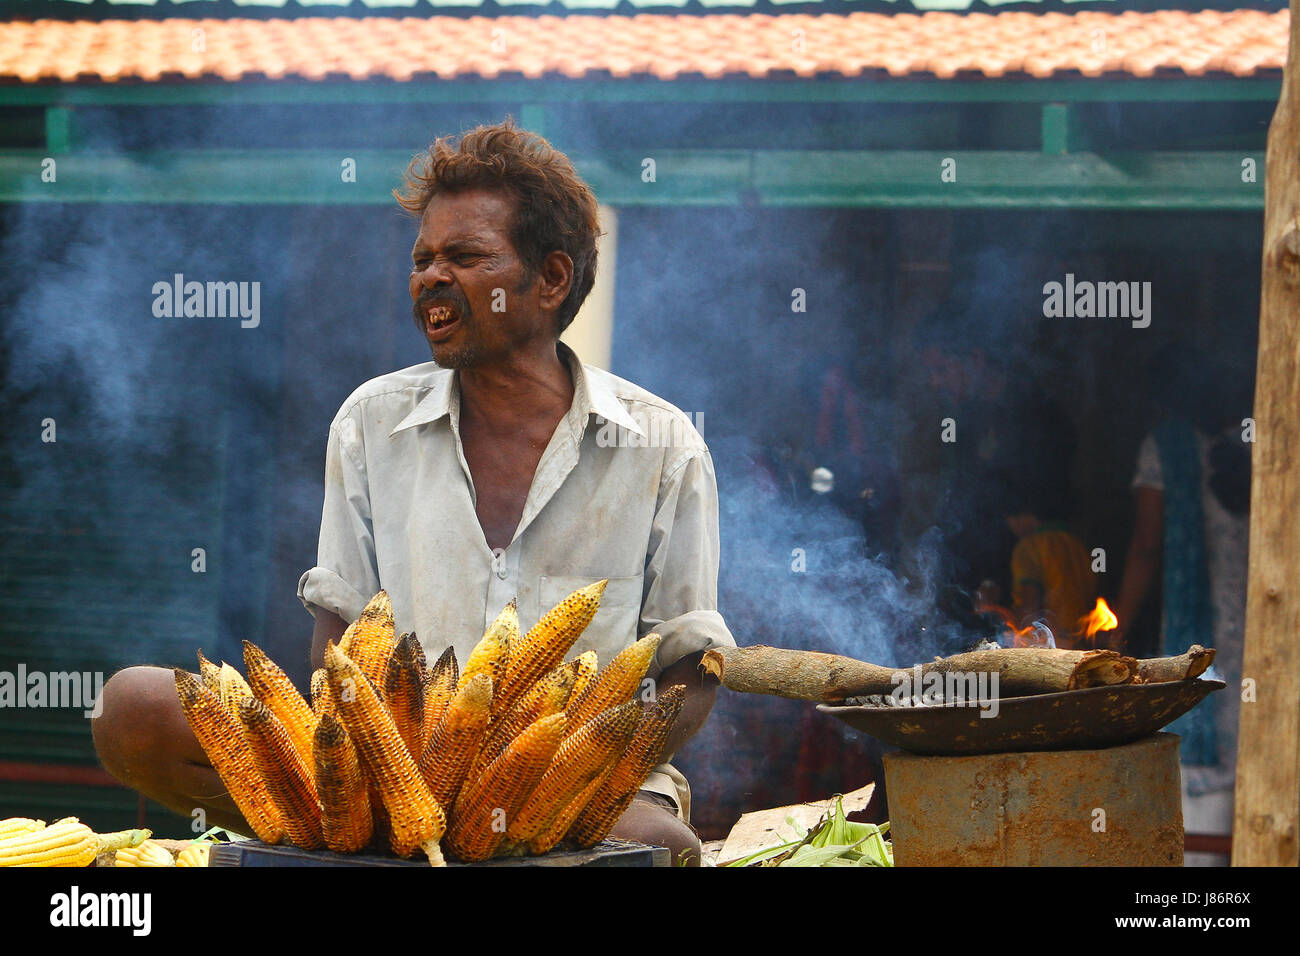 A street vendor selling roasted corn on a hot sunny day in the streets of India to earn his livelihood Stock Photo